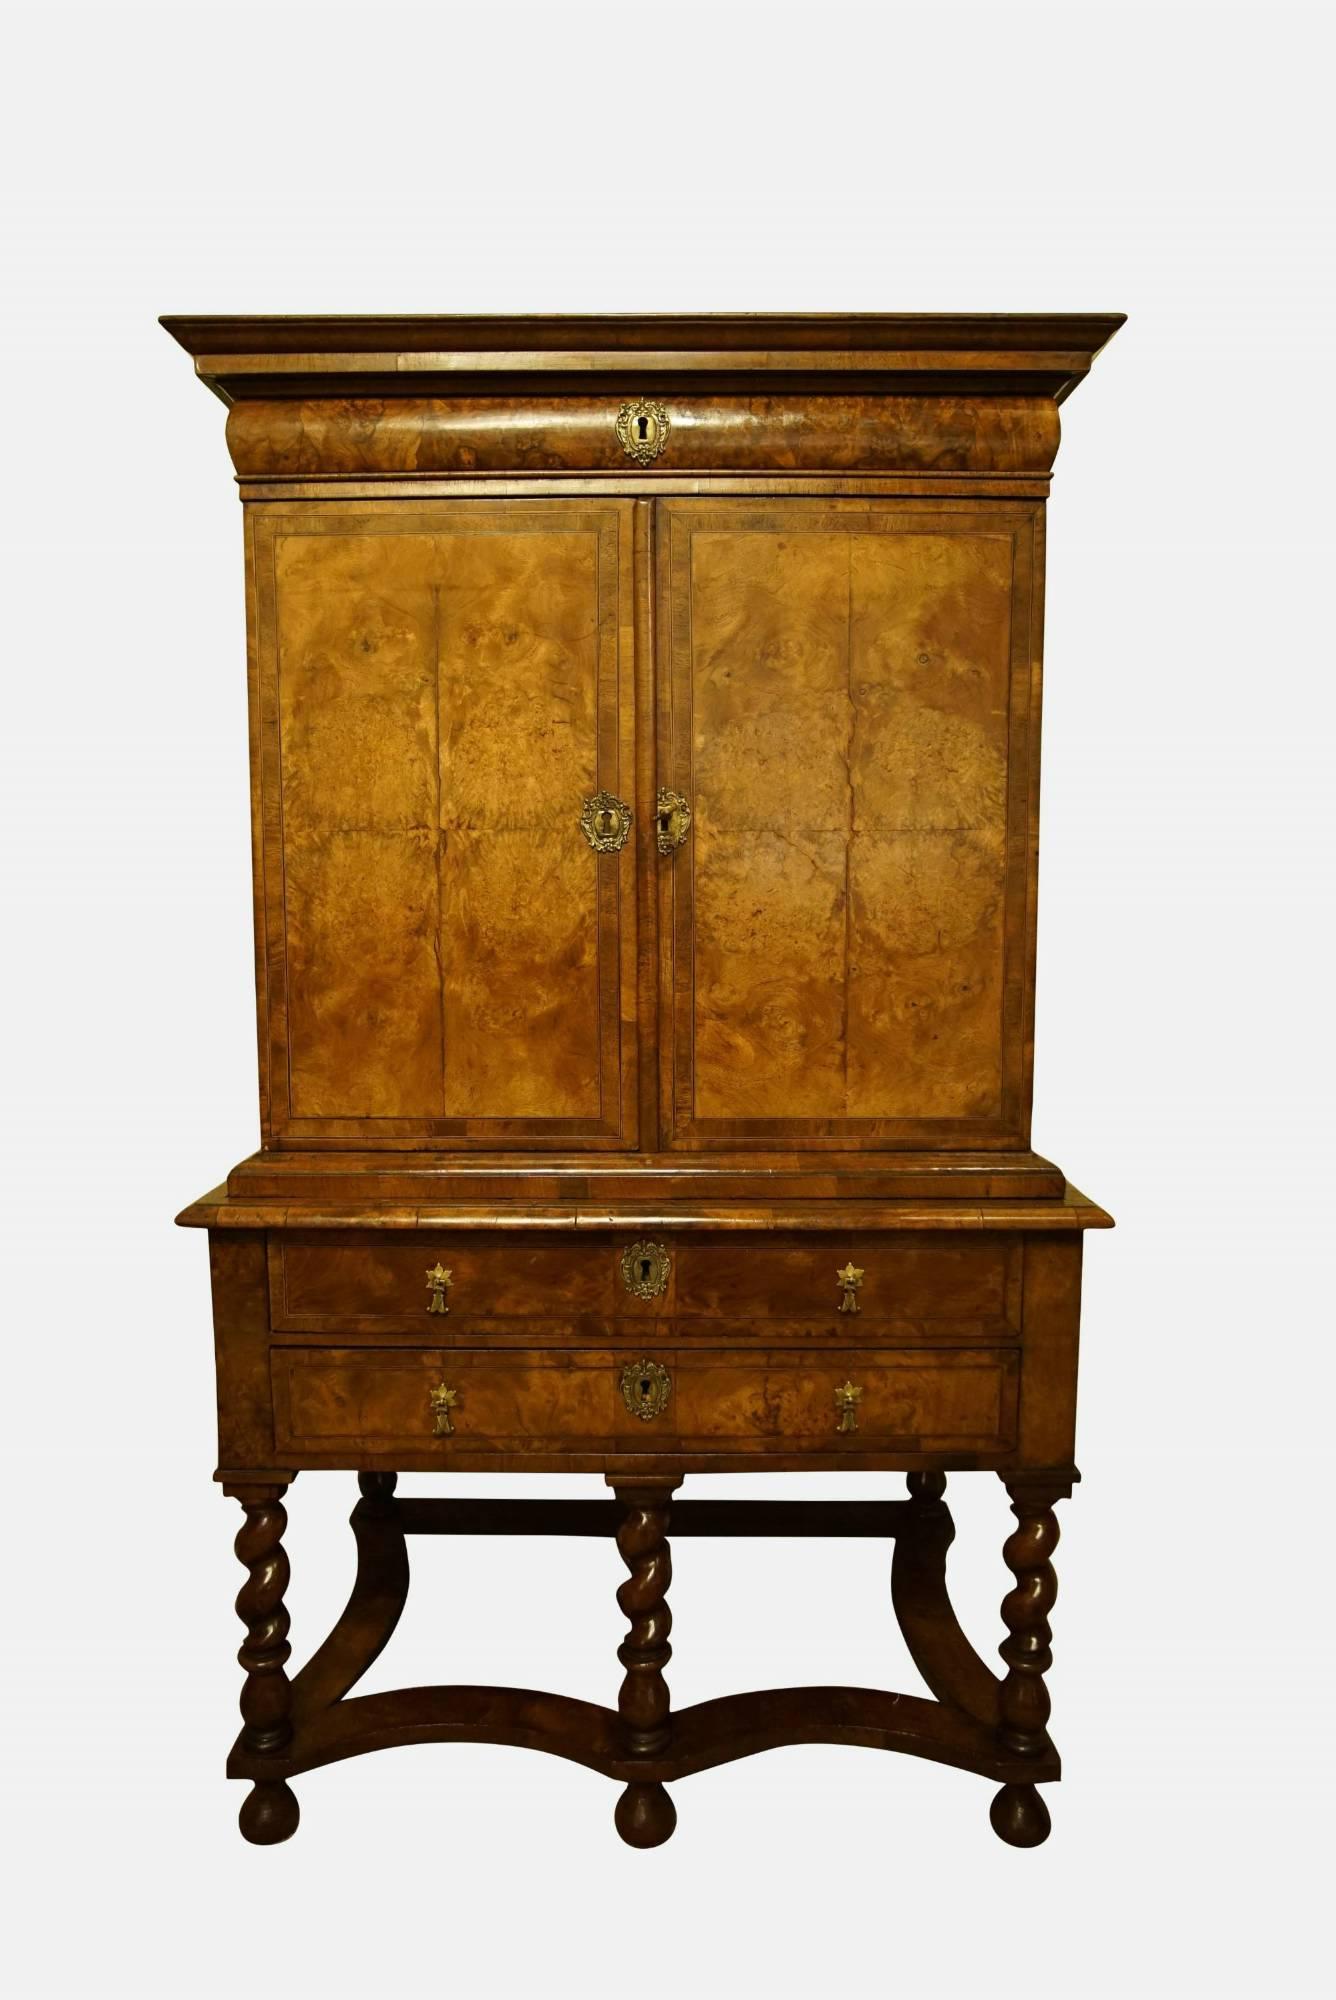 A fine and rare Queen Anne burr walnut cabinet on stand with a frieze drawer above quartered, banded and line inlaid doors opening to an interior of short drawers above the original two drawer base raised on twist turned legs and stretchers (the